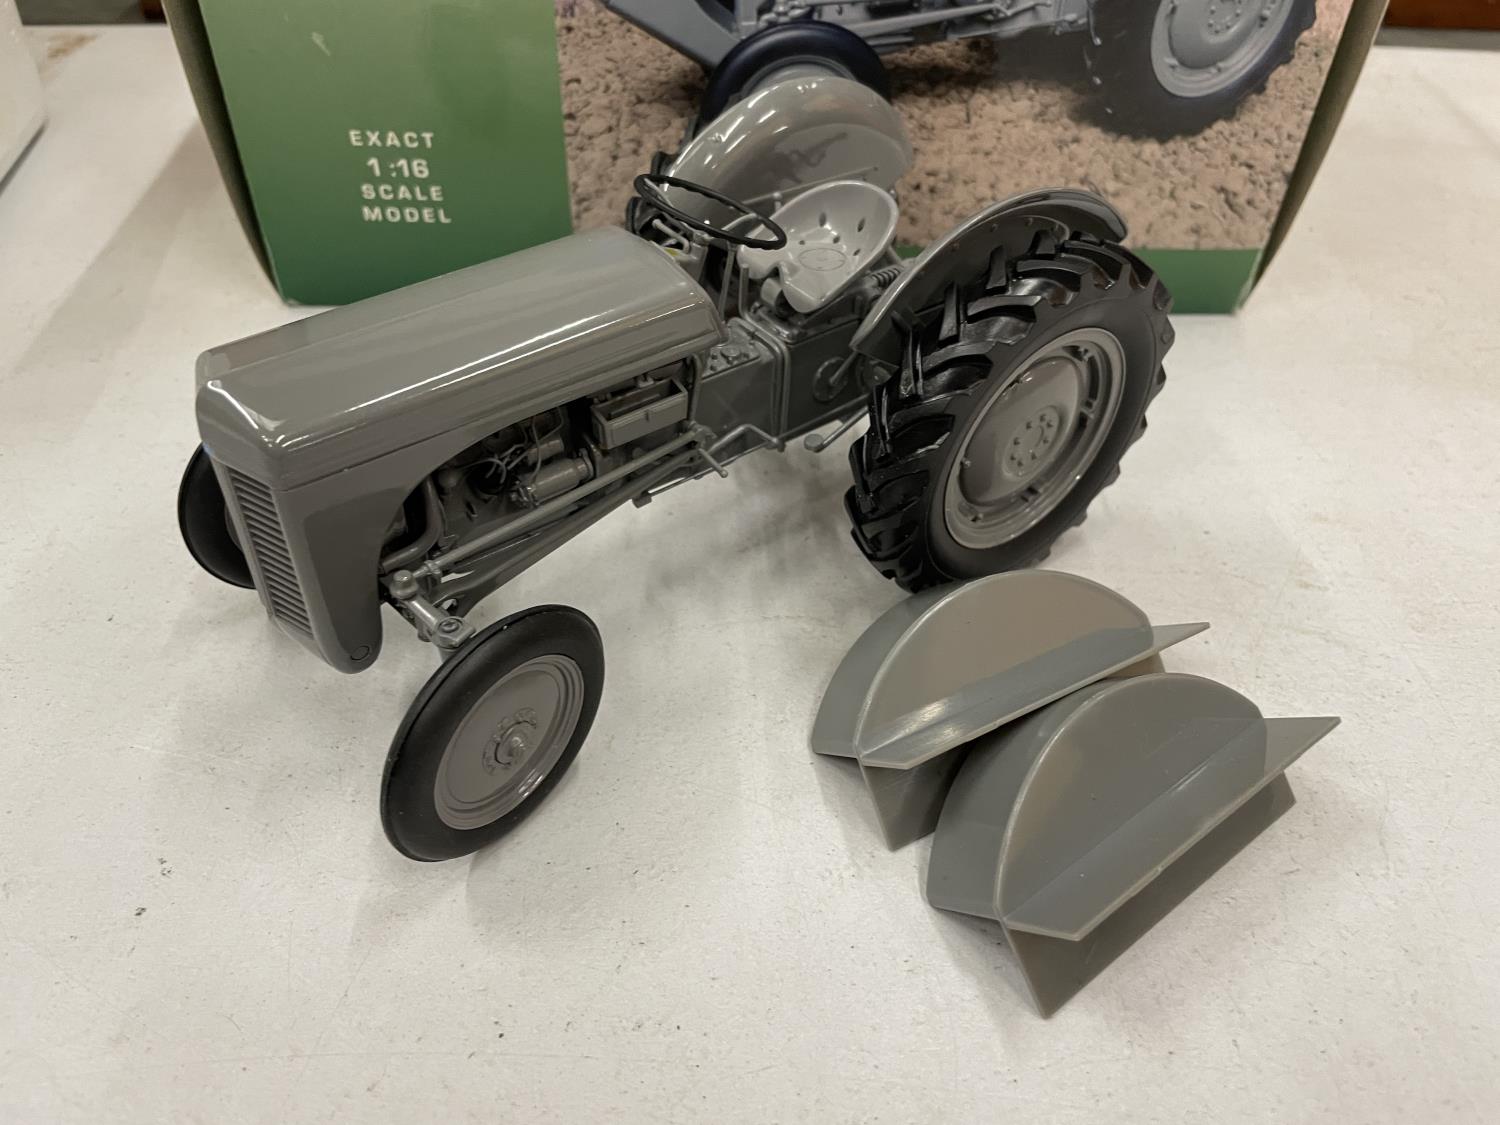 A BOXED UNIVERSAL HOBBIES MASSEY FERGUSON TE20 'THE LITTLE GREY' TRACTOR 1:16 SCALE - Image 2 of 4